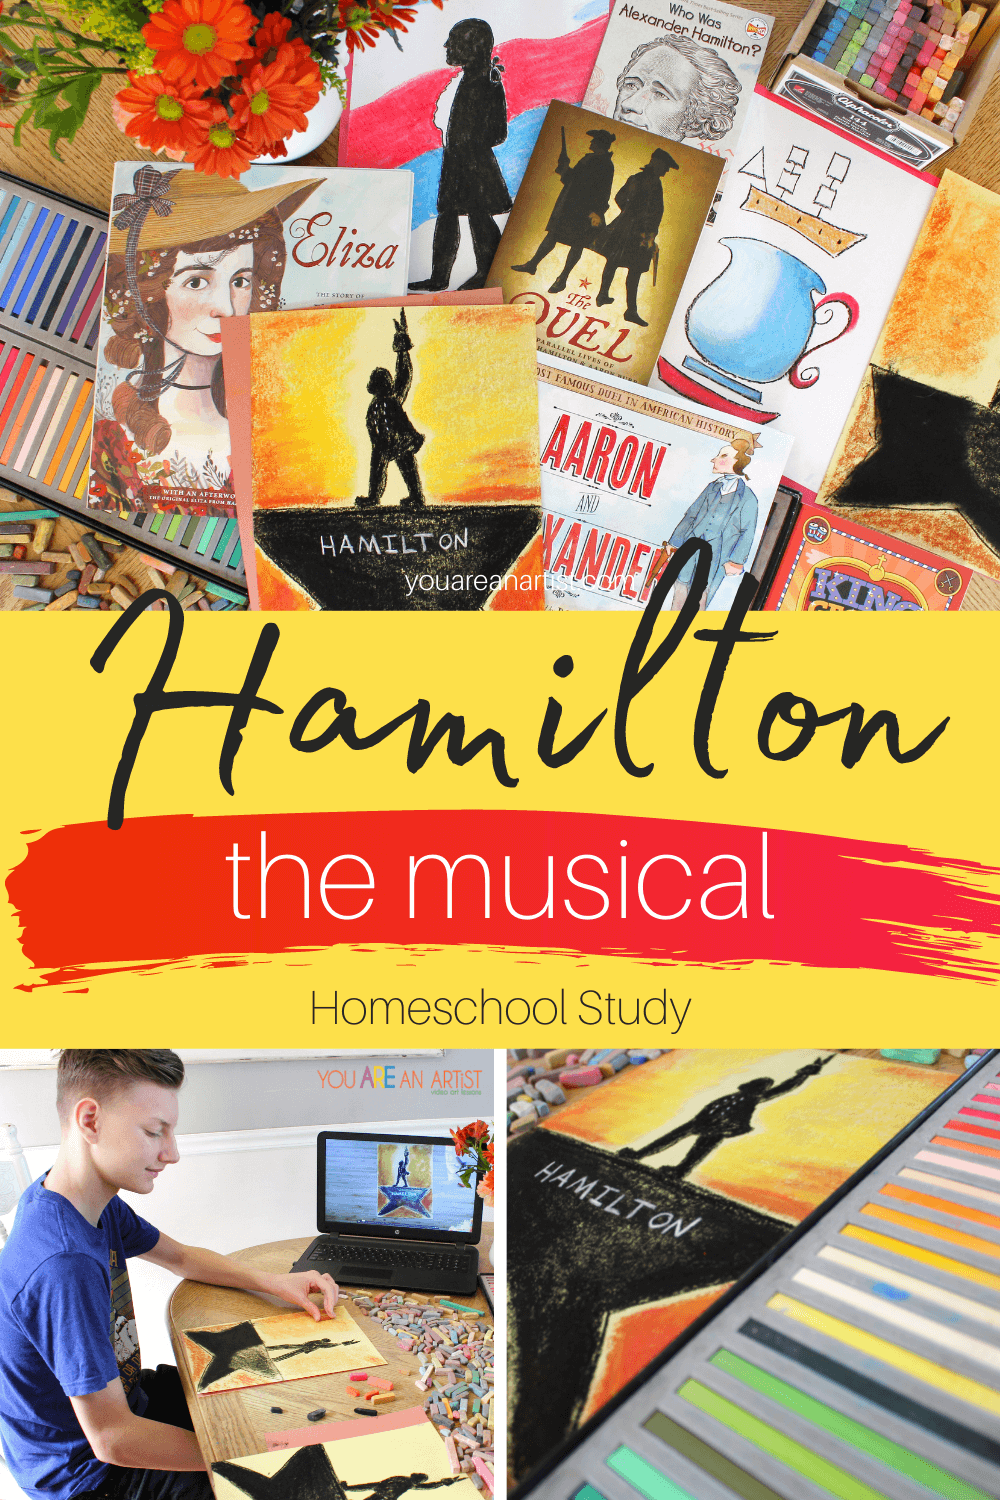 Hamilton The Musical Homeschool Study:Are you looking for ways to bring the revolutionary war to life? Do your older kids love music? Did you know you could combine the two with books and chalk pastel art to provide a hands-on learning experience? Use these ideas to create your own Hamilton the musical homeschool study! #Hamiltonthemusical #Hamilton #AlexanderHamilton #revolutionarywar #chalkpastelart #homeschool #unitstudy 